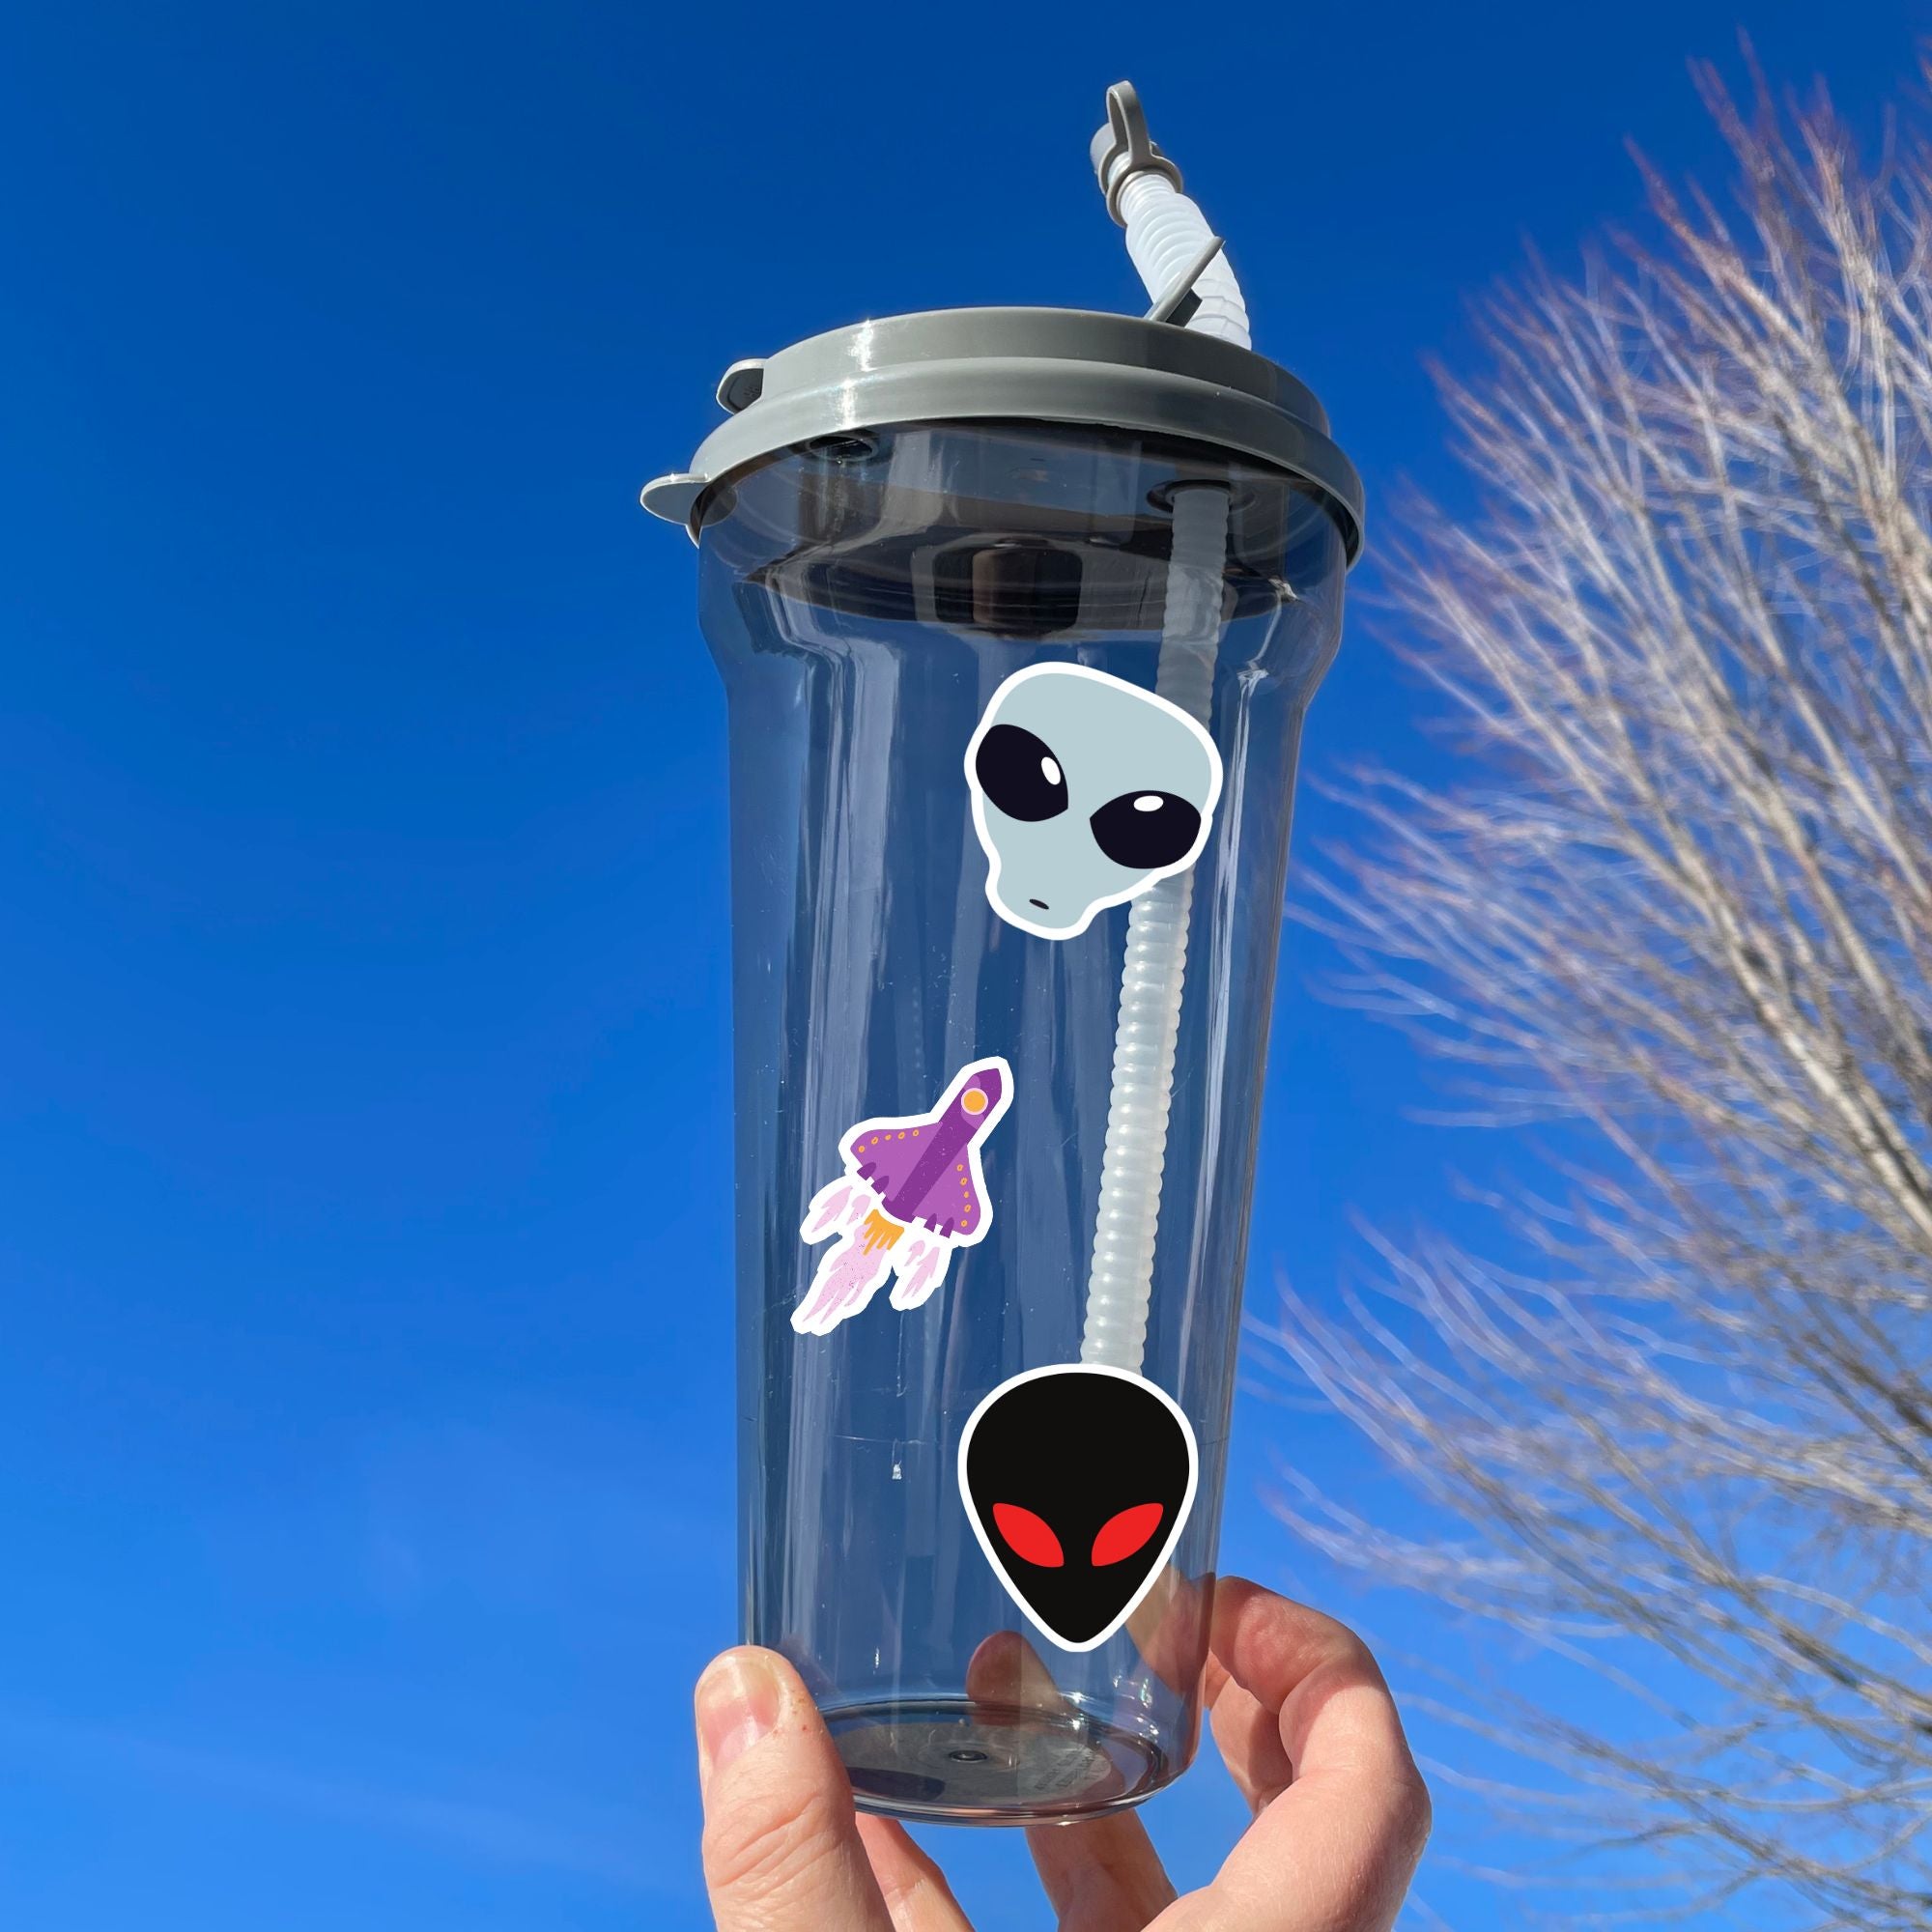 This sticker sheet is filled with aliens and UFOs with individual stickers of aliens, space ships, and alien creatures. This image is of a water bottle with some of the individual stickers on it.